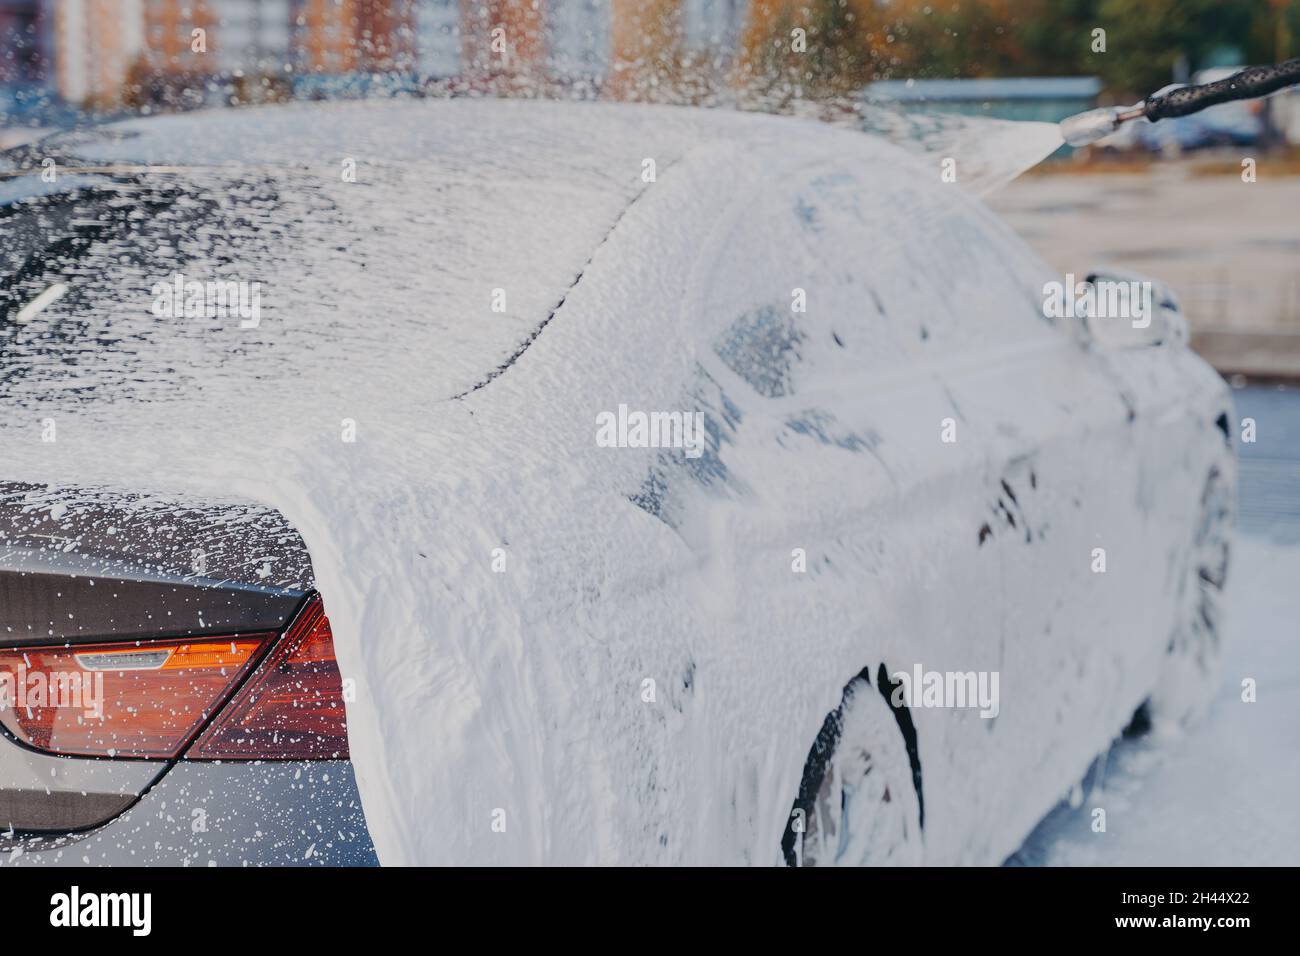 Car in white soap foam during cleaning with high pressure washer at carwash station Stock Photo